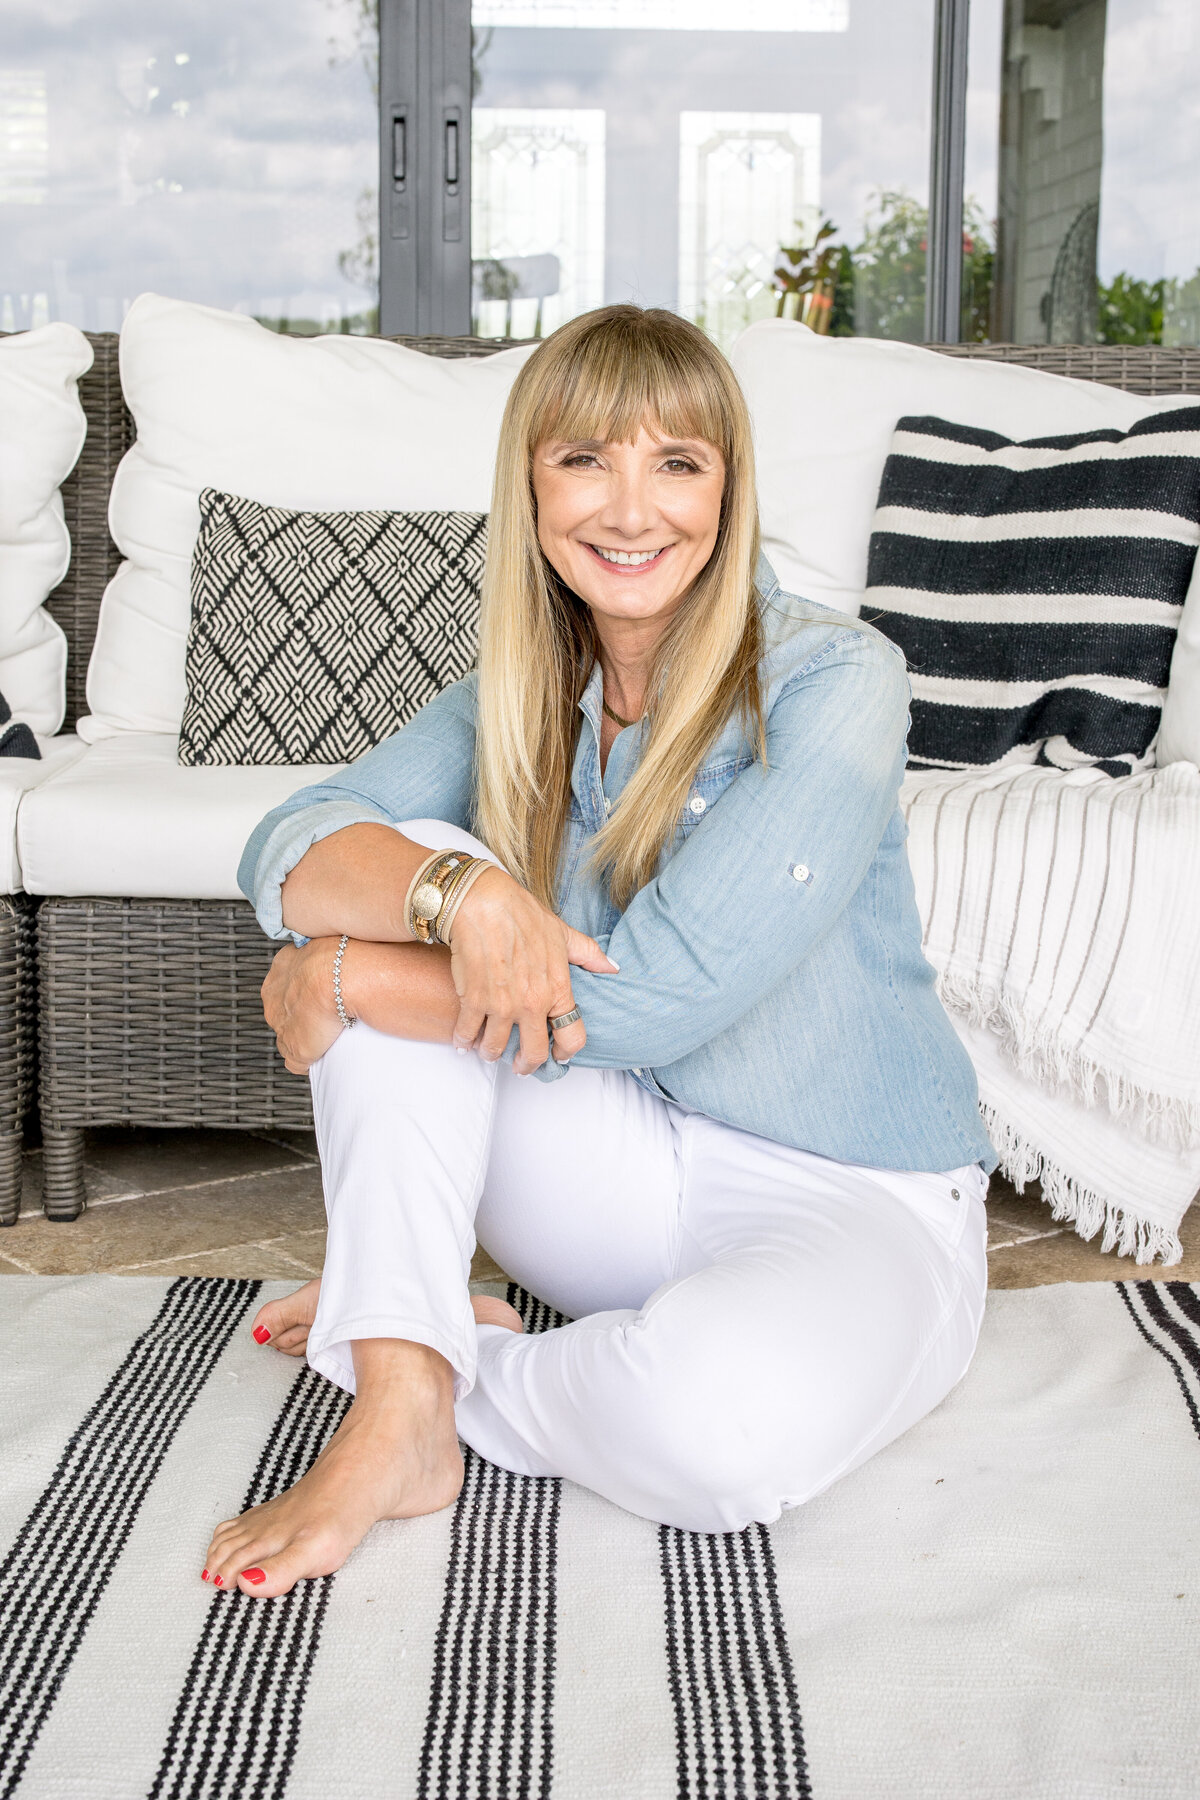 Orlando photographer captures Brand photo shoot in the home of her client as she sits on a black and white rug with her legs crossed as she holds one need to her chest and smiles for her brand photo